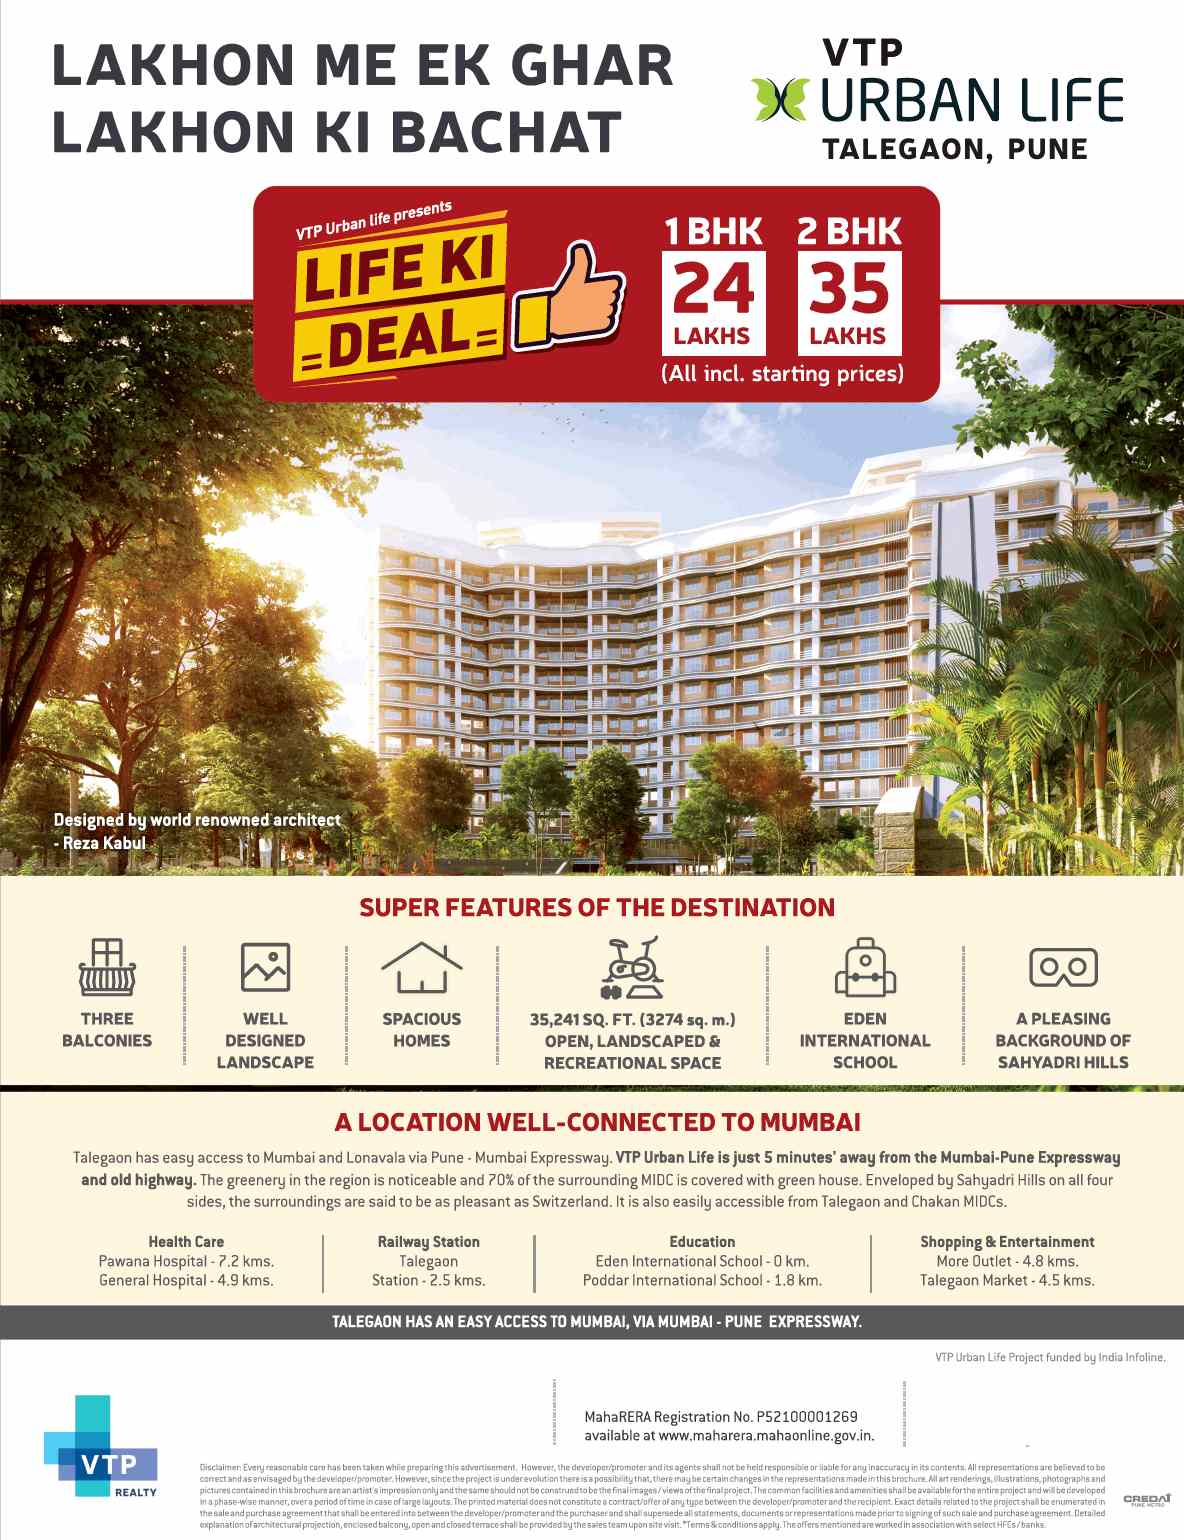 Enjoy the super features by residing at VTP Urban Life in Pune Update